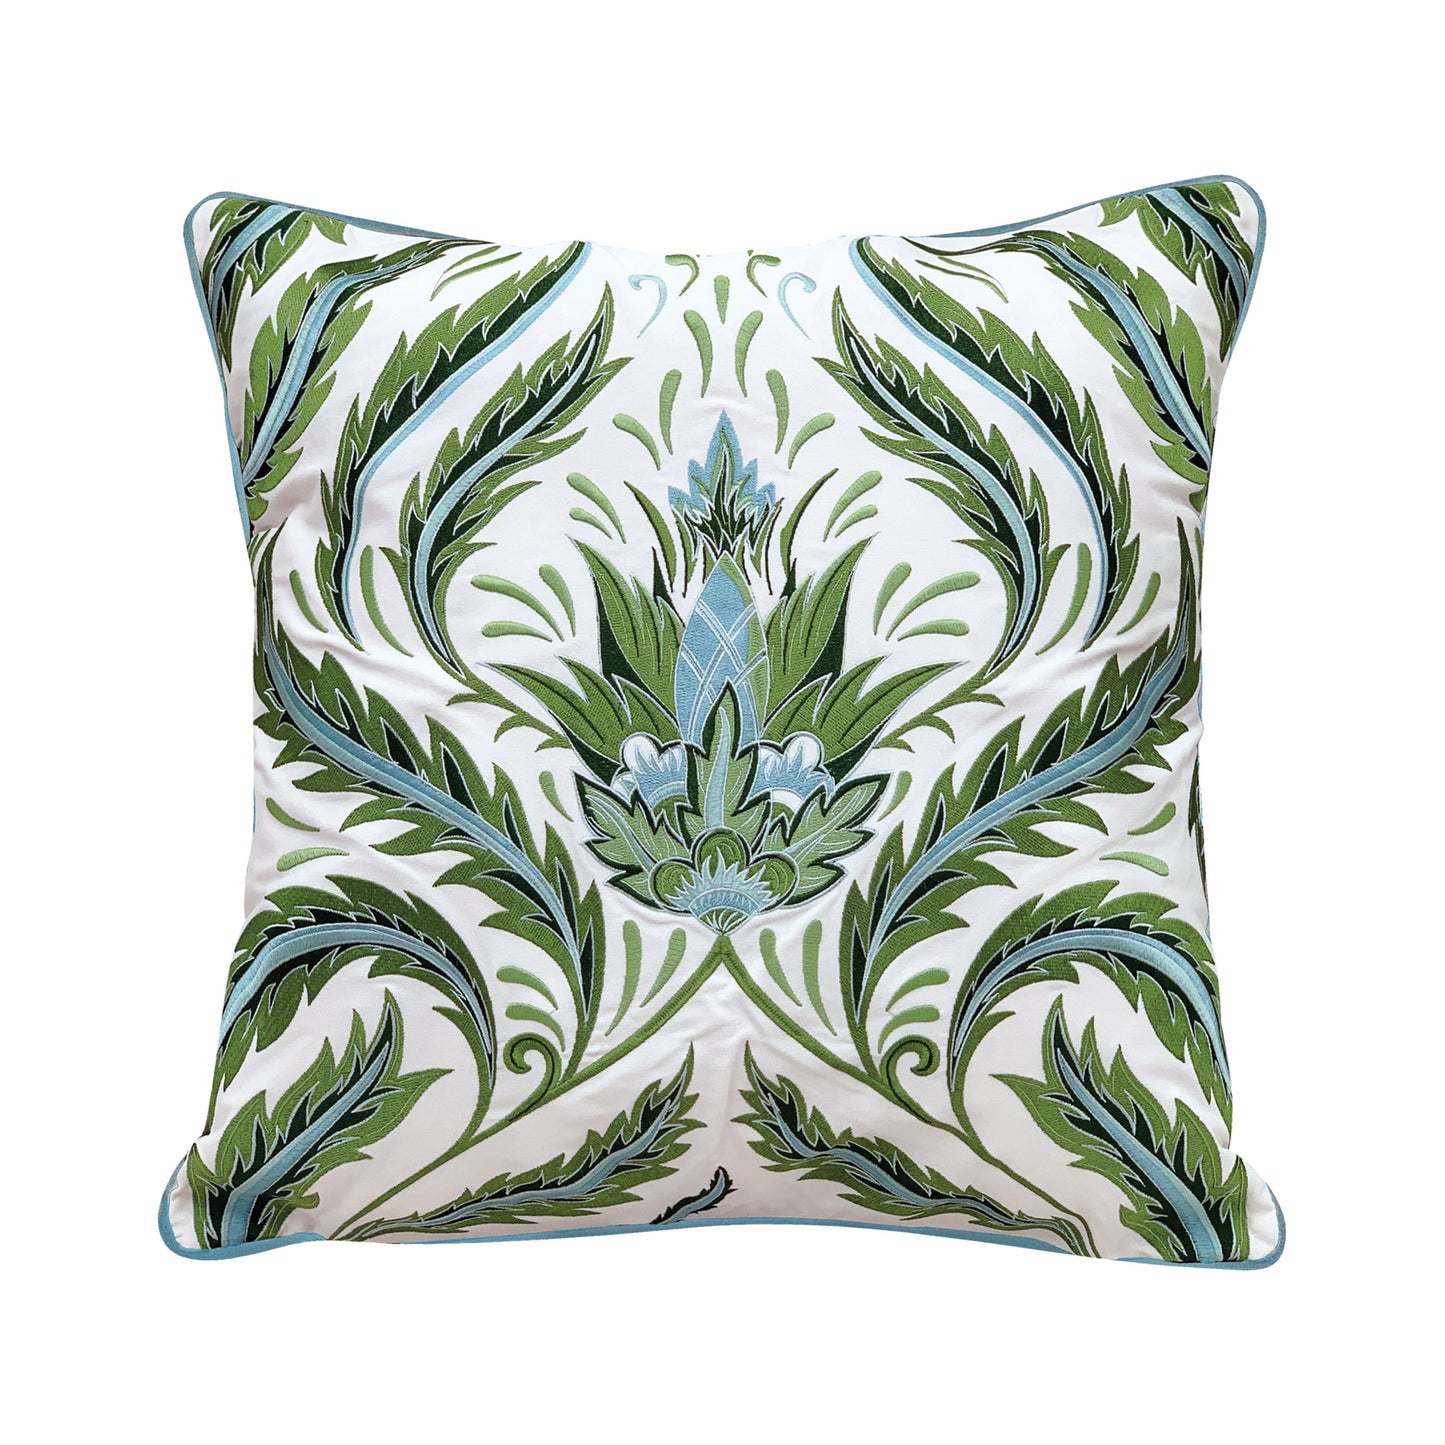 Traditional thistle design embroidered in hues of green and blue on a white background.